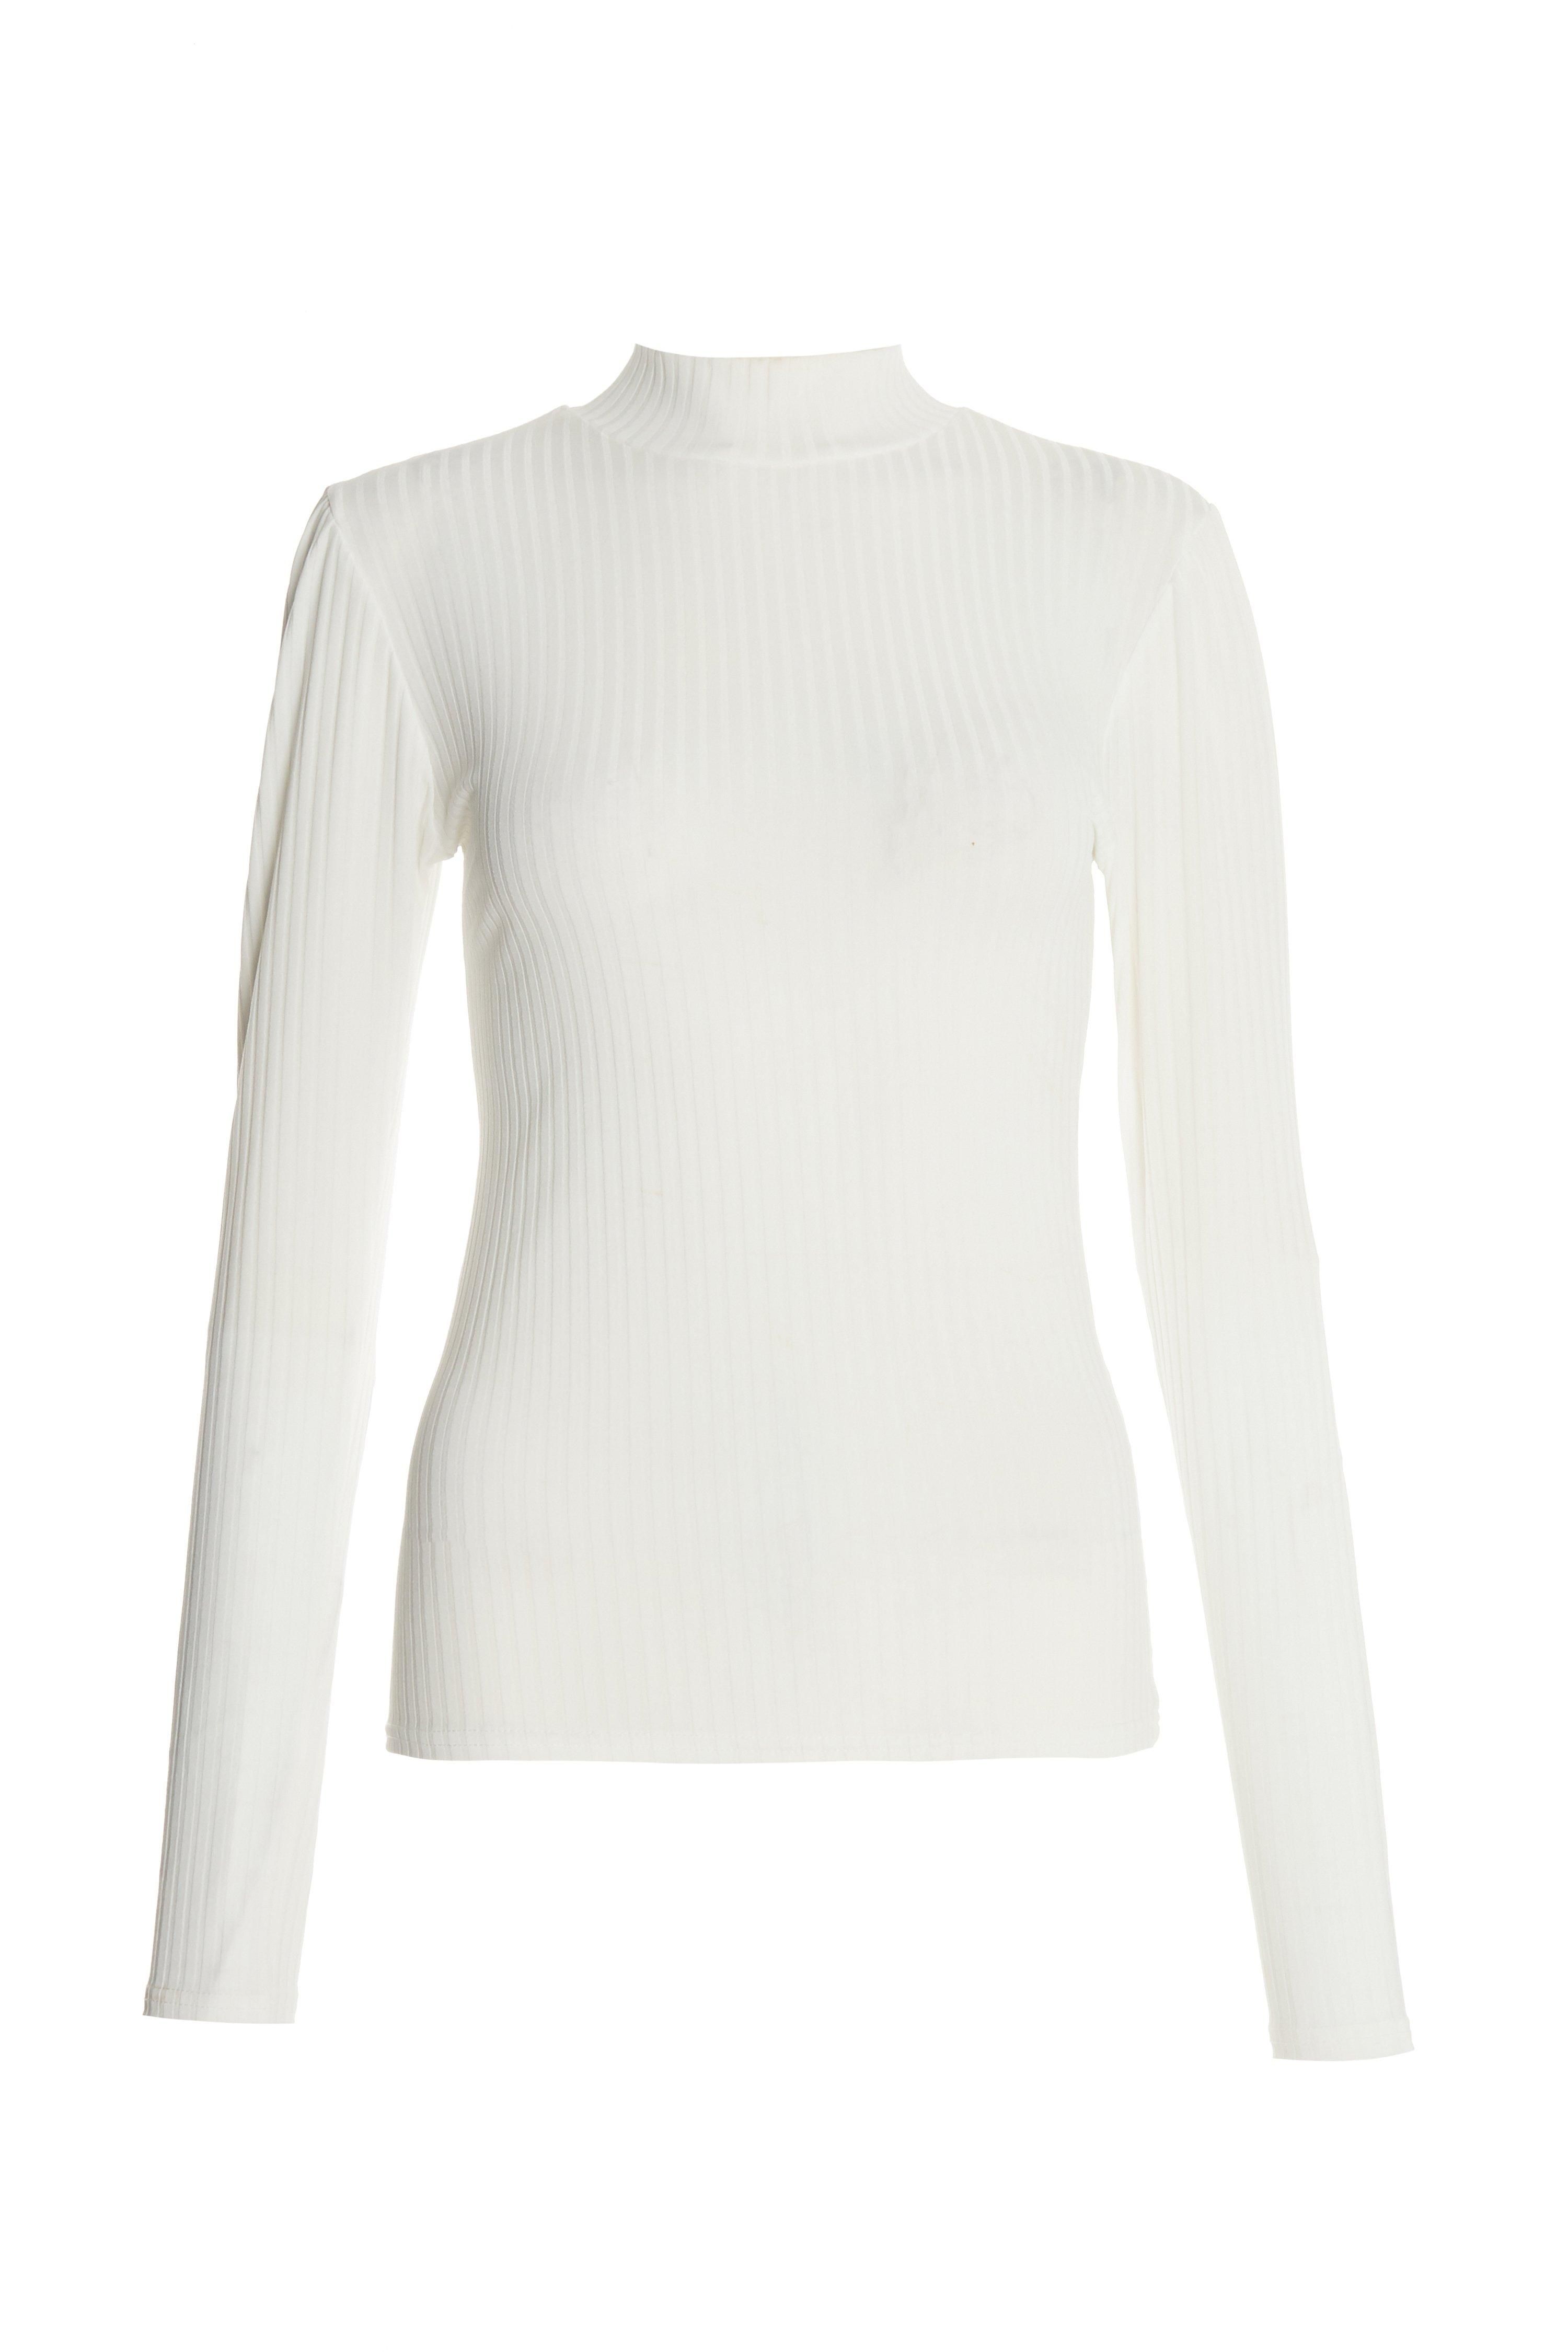 - Turtle neck  - Ribbed texture  - Long sleeve  - Length: 60cm approx  - Model Height: 5' 8